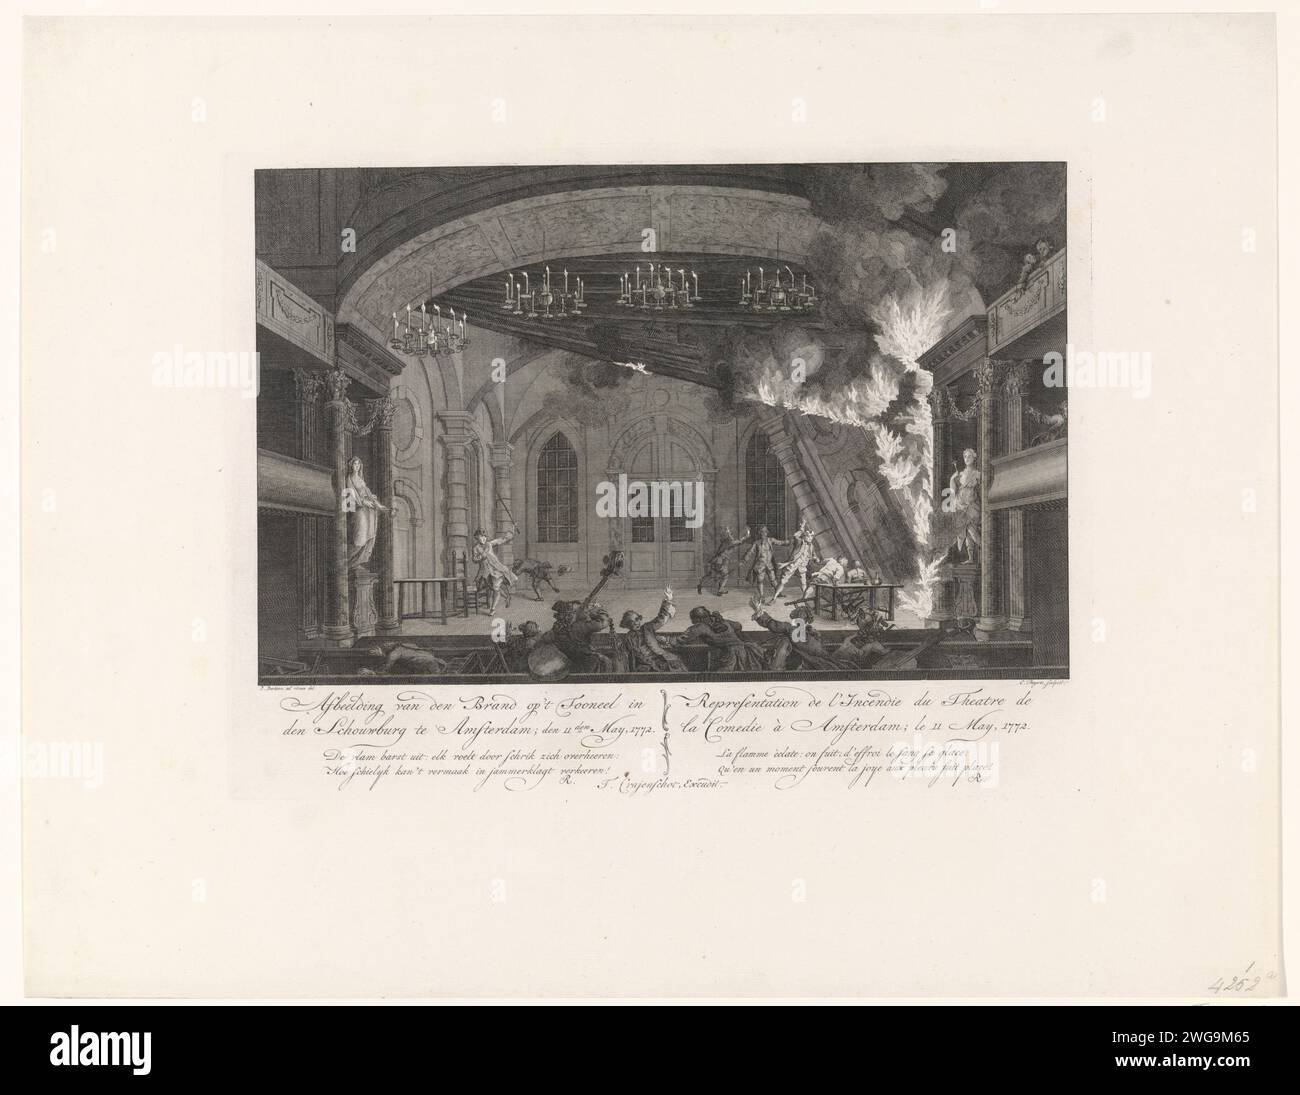 Theater of the Amsterdam Schouwburg at the outbreak of the Brand, 1772, Cornelis Bogerts, after Pieter Barbiers (I), 1772 print View on the scene of the Amsterdamse Schouwburg during the outbreak of the fire on 11 May 1772. The fire started during the performance of the opera 'De Deserteur'. On stage, actors flee and on the right a burning set piece falls around. Musicians flee the orchestra bin in the foreground. Under the show the title and a two -way verse in Dutch (left) and French (right). Part of a series of four prints with title print about the fire in the Amsterdam Schouwburg. Amsterd Stock Photo